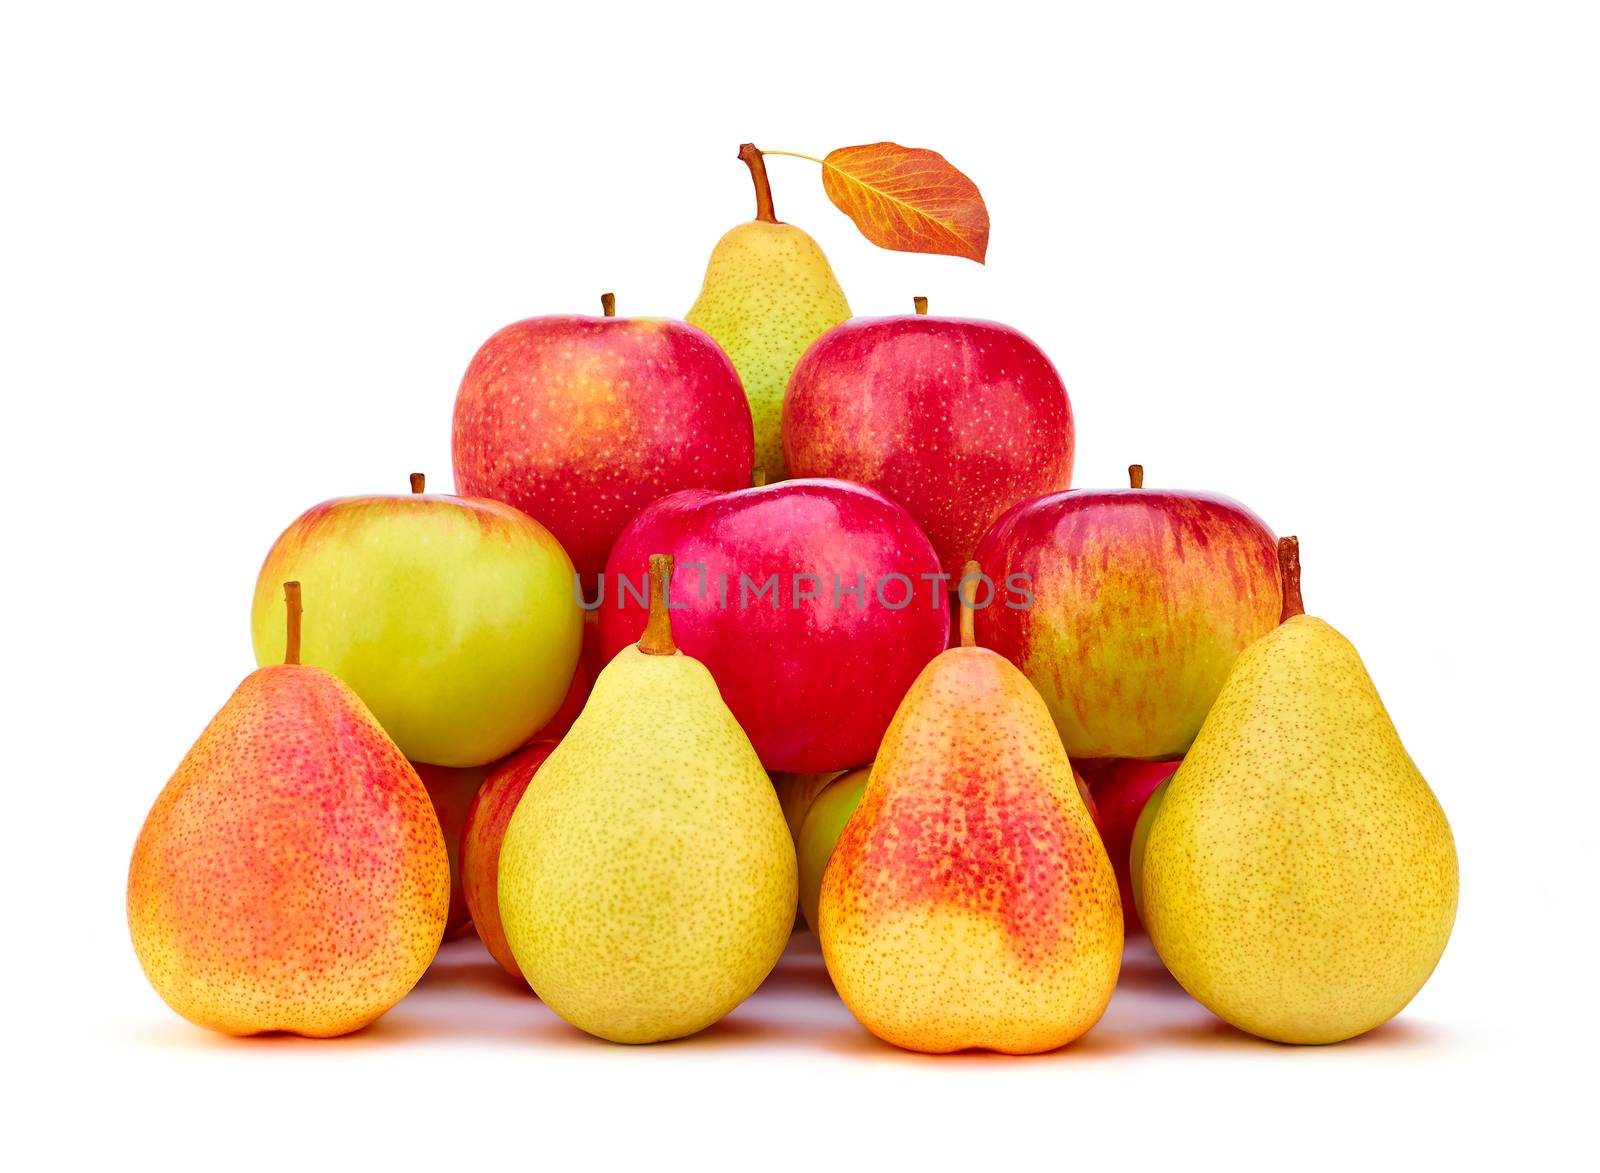 Fruits pears, apples organic fresh pyramid.Harvest by 918